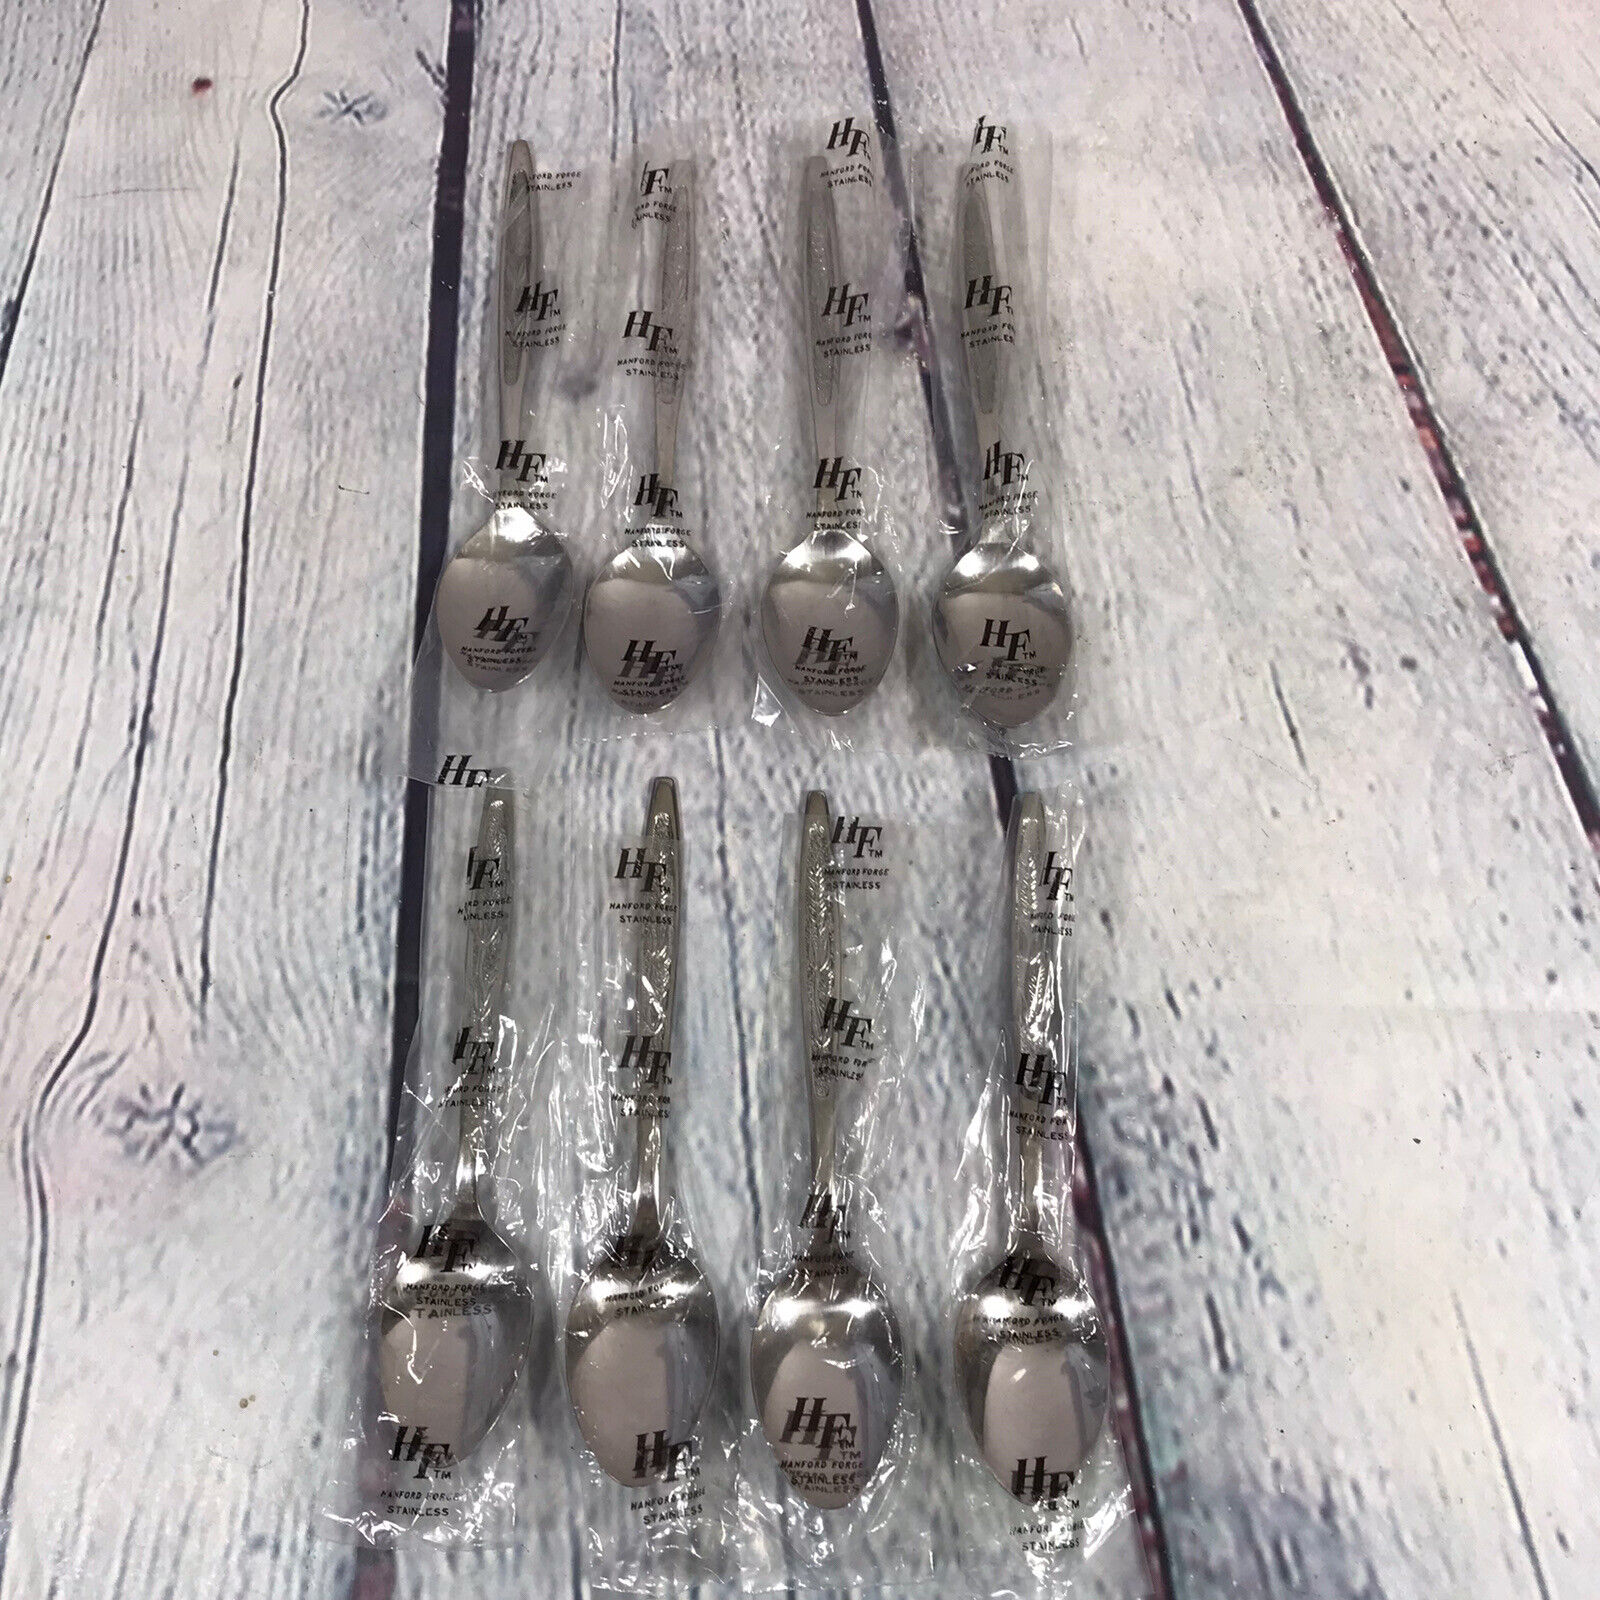 8 Hanford Forge PROVINCIAL WHEAT Stainless Teaspoons Korea Flatware New 6.25\